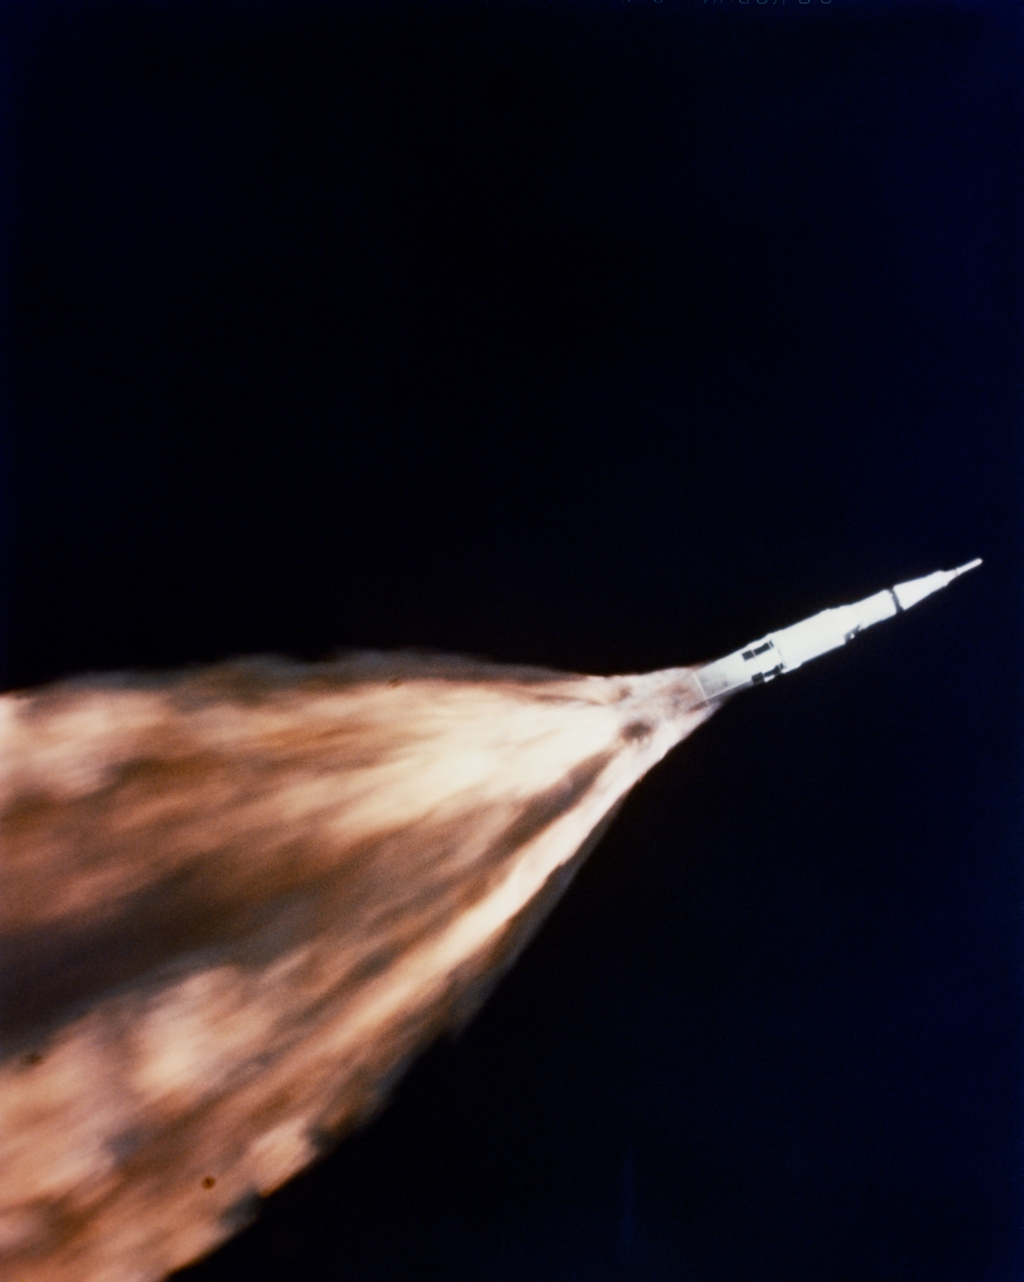 31. NASA Apollo Mission VI (Spacecraft 020/Saturn 502): Creating Huge Flames of Fire Seconds After Liftoff, Five First Stage (S-IC) F-1 Engines Propel the Saturn V Rocket Carrying the Unmanned Apollo 6 Spacecraft 020 Into Space, April 4, 1968, NASA John F. Kennedy Space Center, State of Florida, USA. Photo Credit: NASA Apollo VI Mission: Unmanned Apollo 6 (Spacecraft 020/Saturn 502); Apollo Imagery (http://spaceflight.nasa.gov/gallery/images/apollo/apollo6/ndxpage1.html): S68-27365 (http://spaceflight.nasa.gov/gallery/images/apollo/apollo6/html/s68-27365.html), NASA Human Space Flight (http://spaceflight.nasa.gov), National Aeronautics and Space Administration (NASA, http://www.nasa.gov), Government of the United States of America.